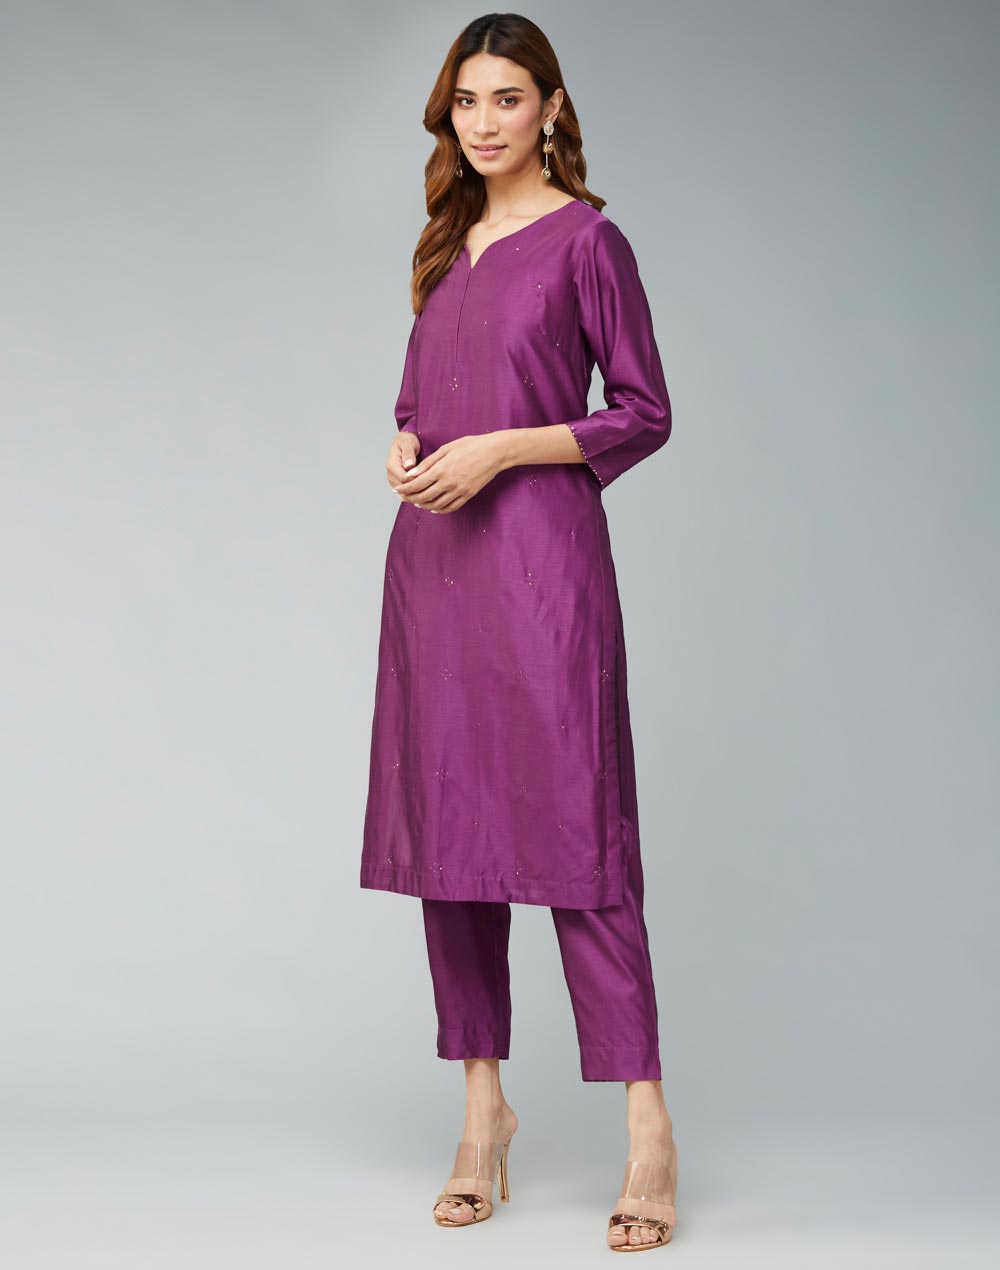 Buy Women Indian Sets For Diwali Online at Best Price - Fabindia